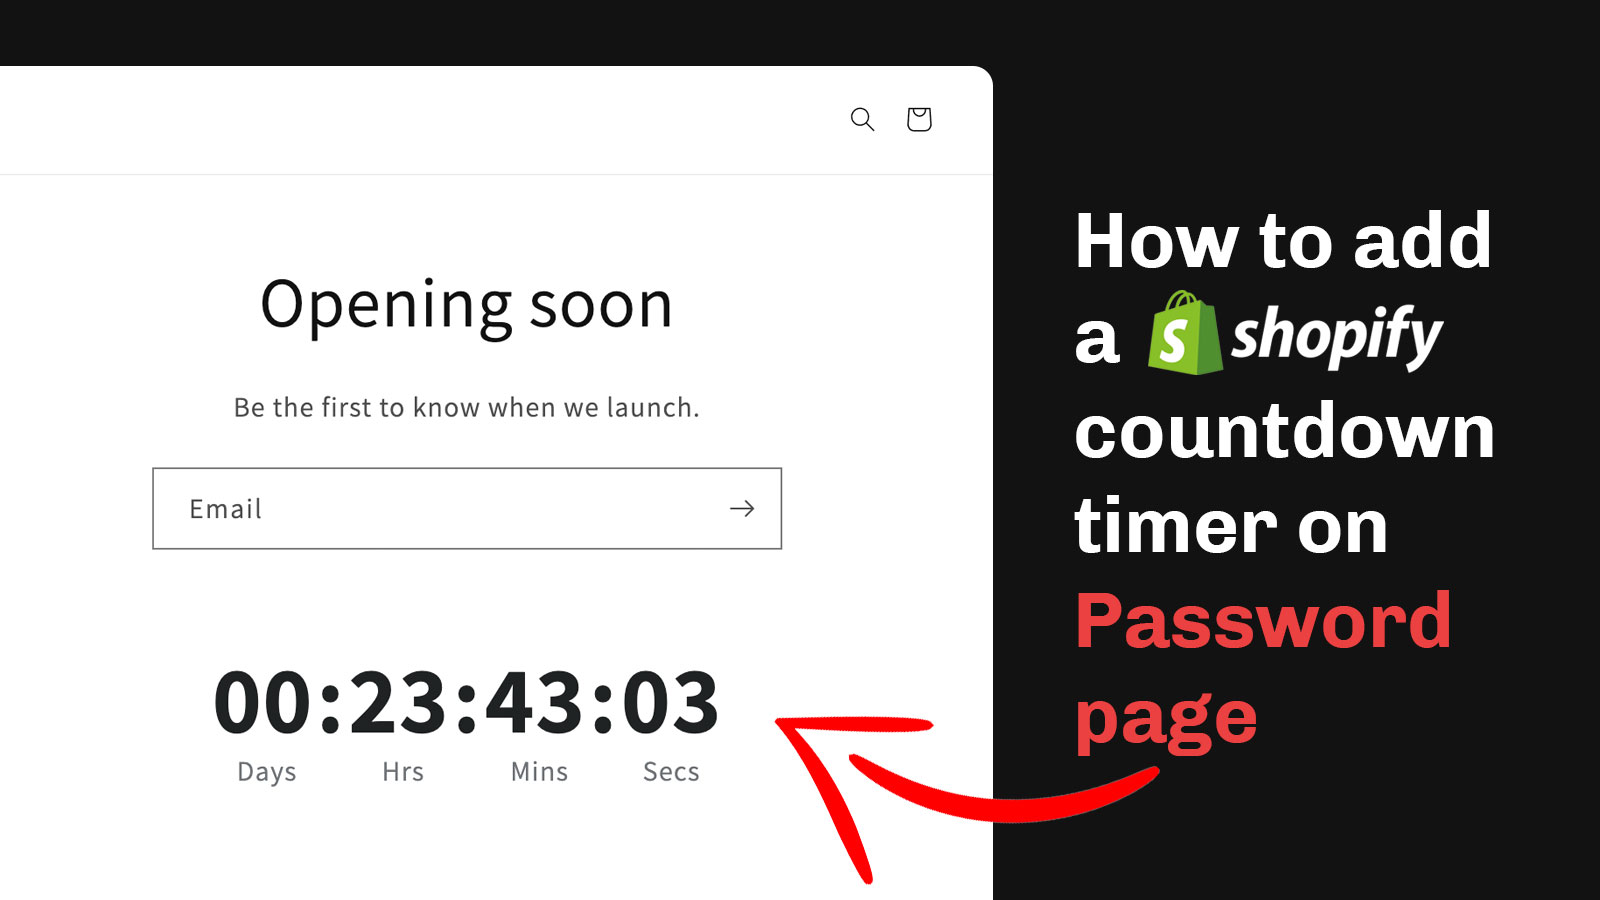 https://essential-apps.com/wp-content/uploads/2022/11/how-to-add-a-Shopify-countdown-timer-to-a-password-page.jpg